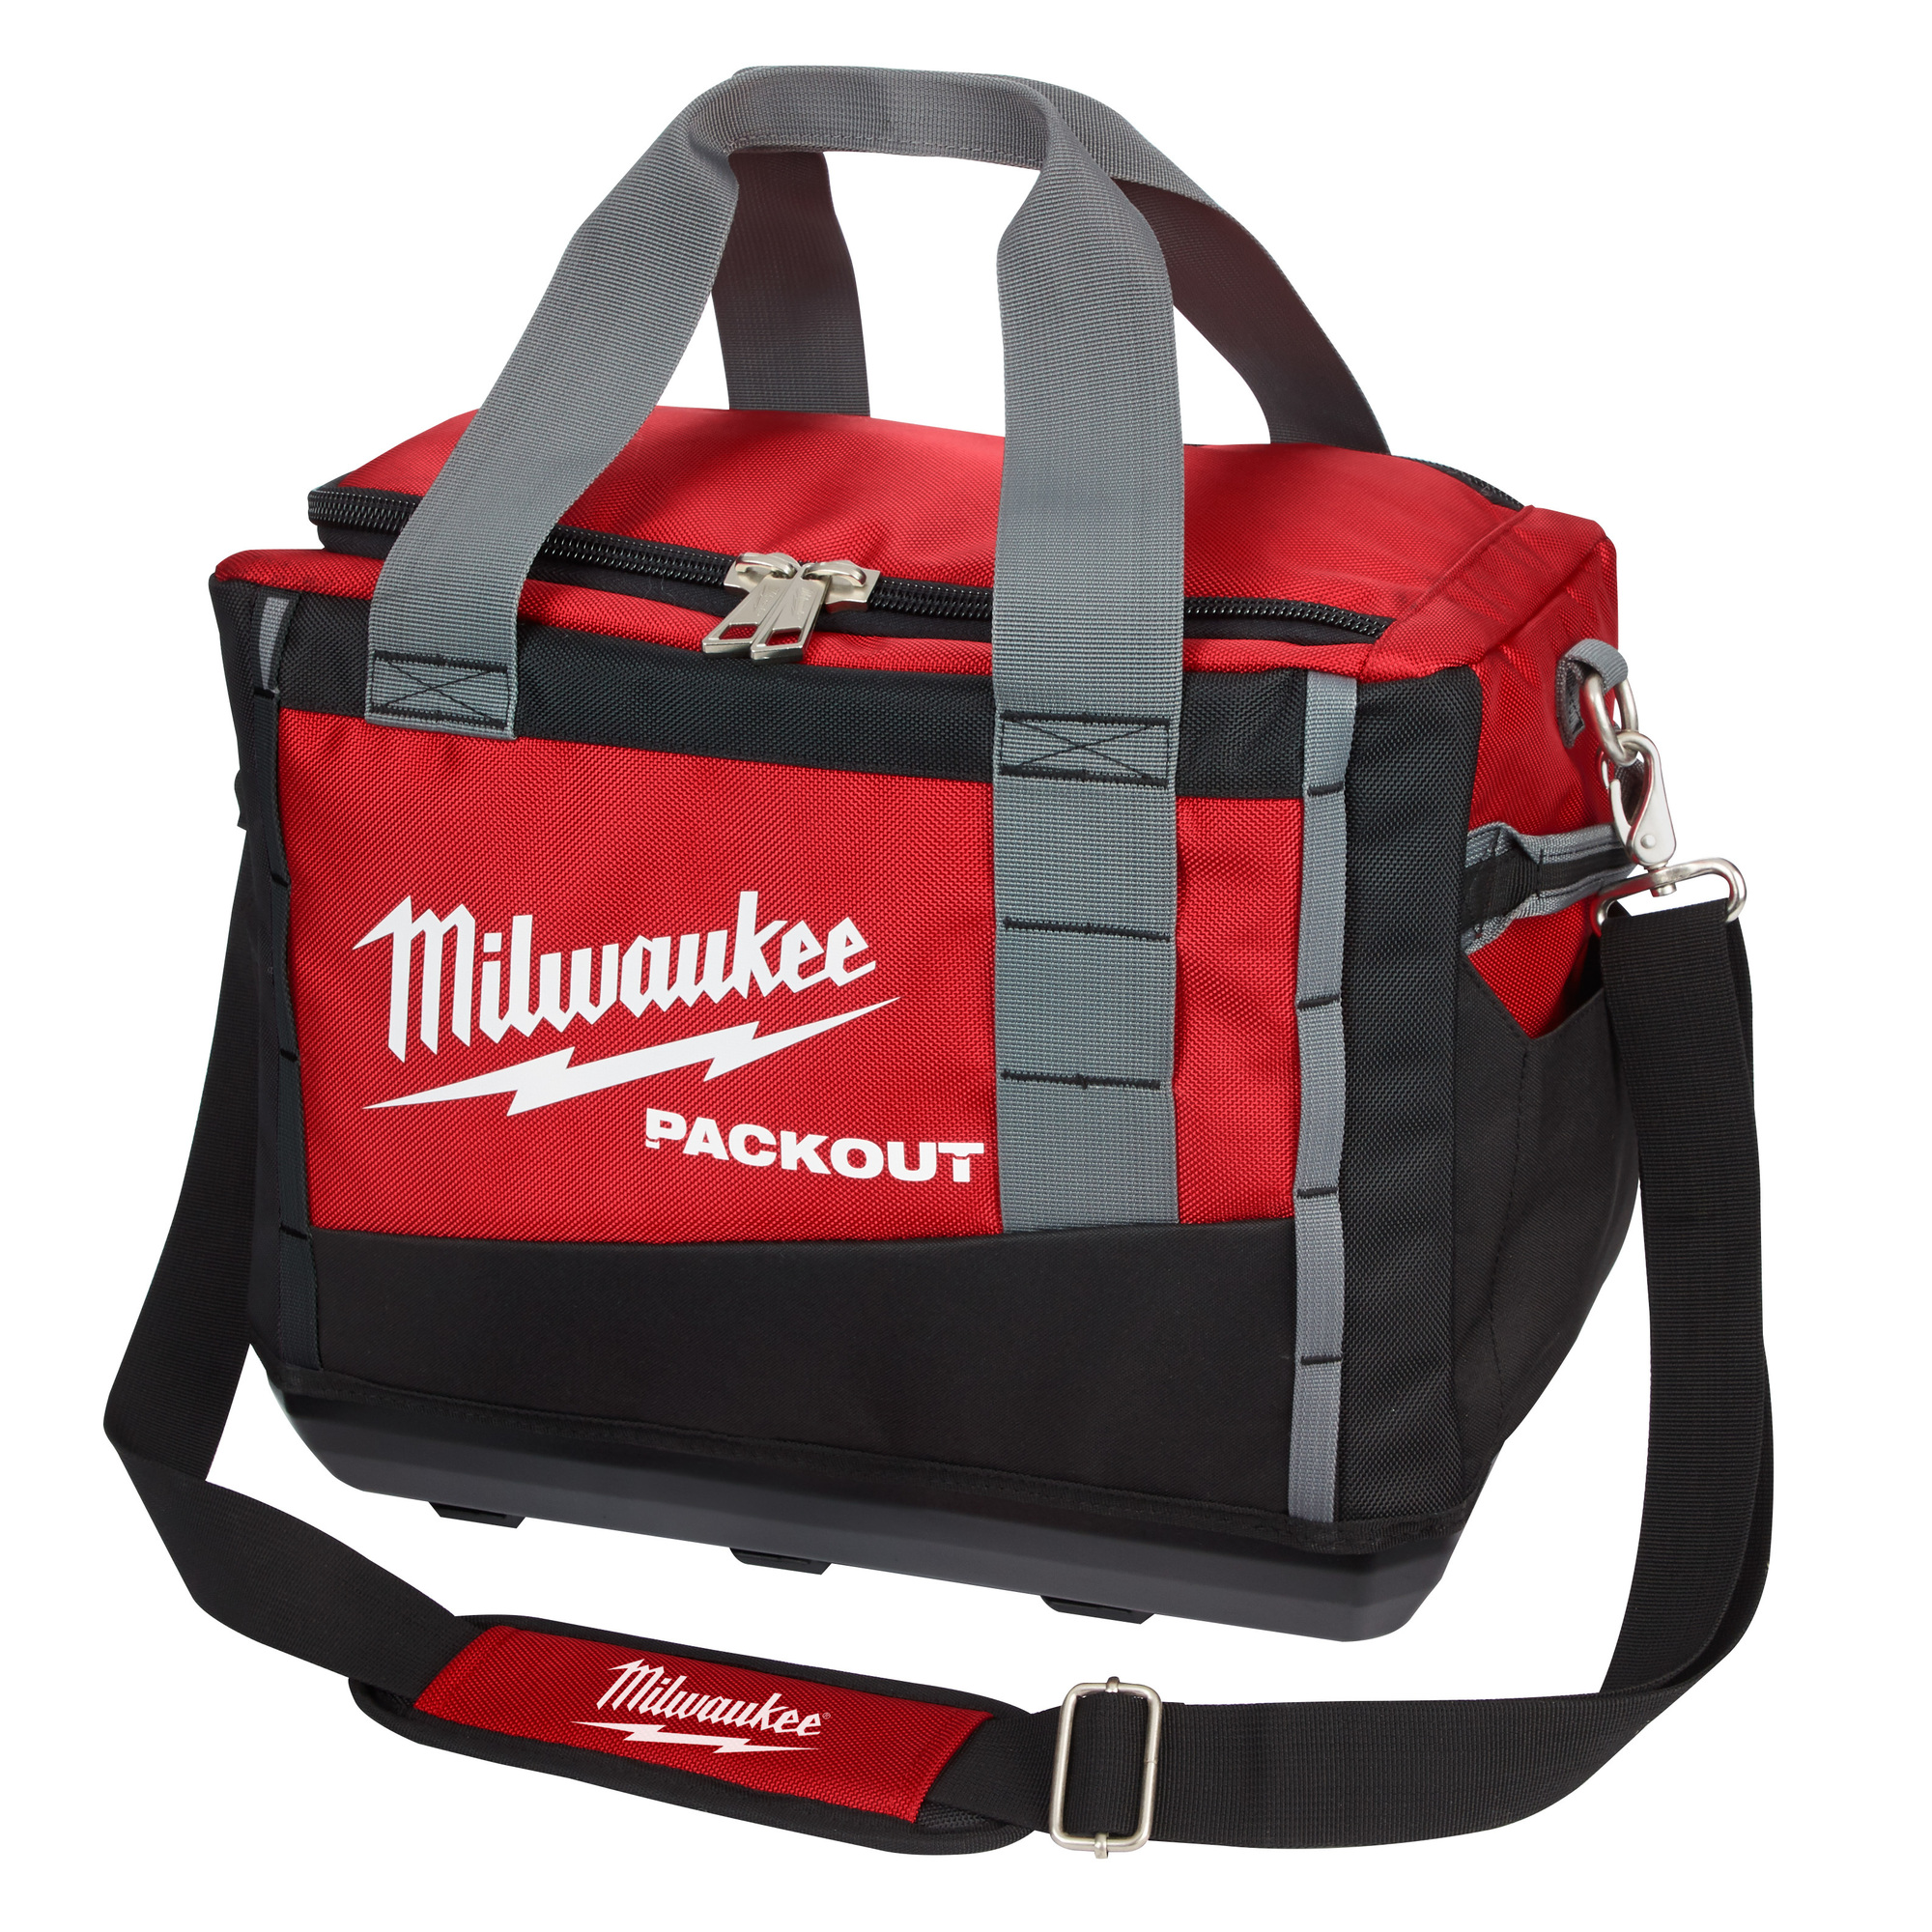 Milwaukee 15Inch Packout Tool Bag, 15Inch W x 9 5/8Inch D x 12 1/4Inch H, Model 48-22-8321